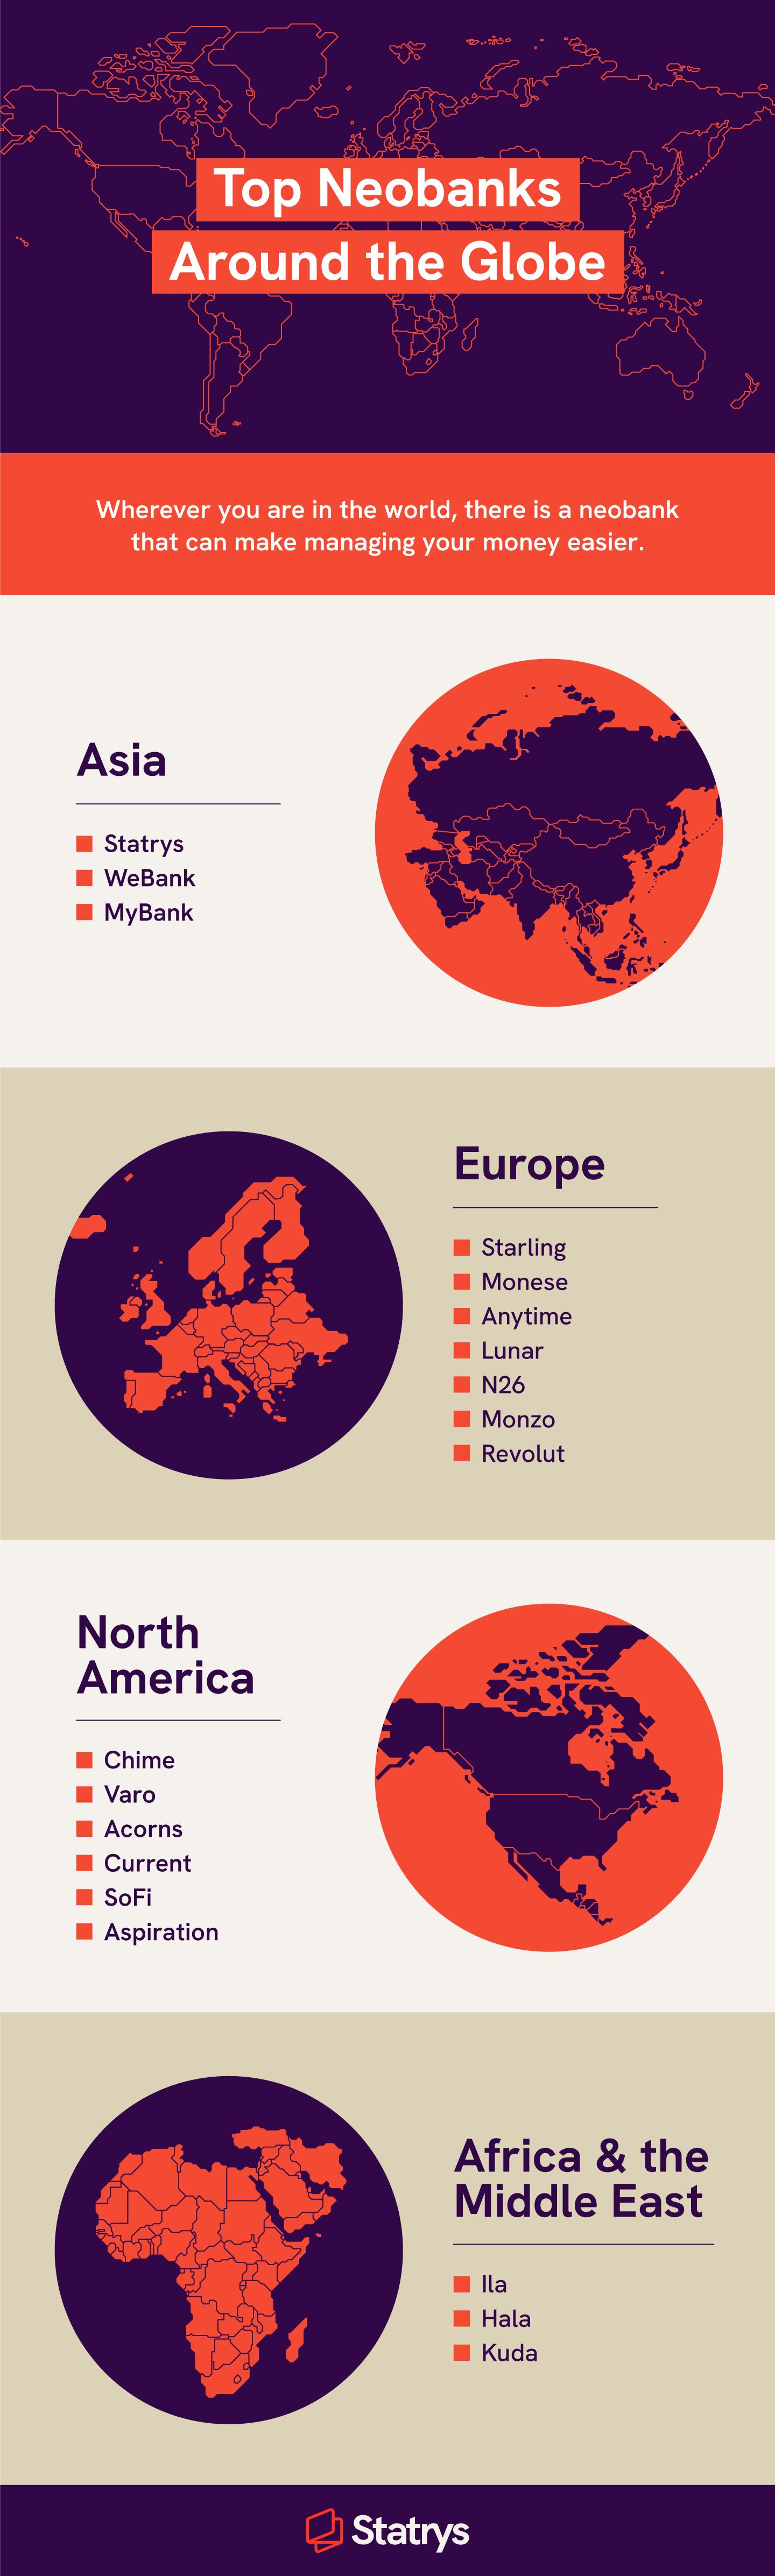  Infographic called top neobanks around the world that features a list of top neobanks in their respective regions around the globe.